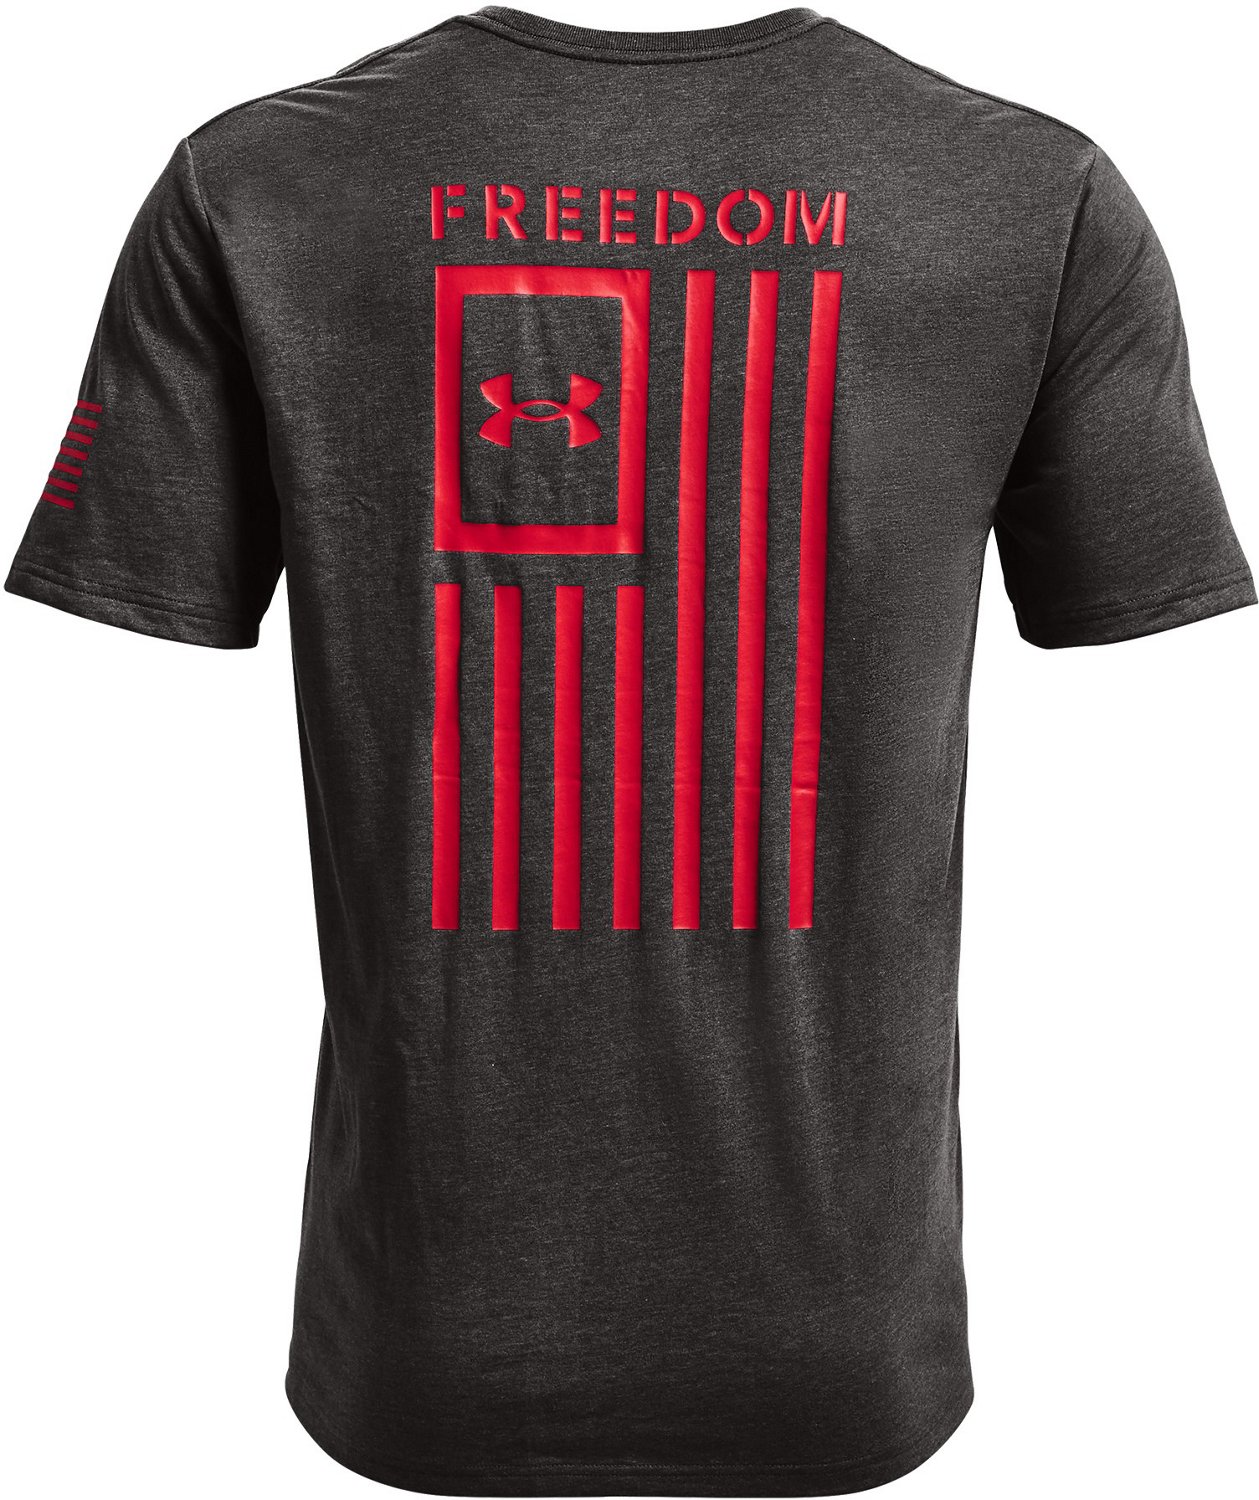 Under Armour Men's Tactical Freedom Express Flag Graphic T-Shirt